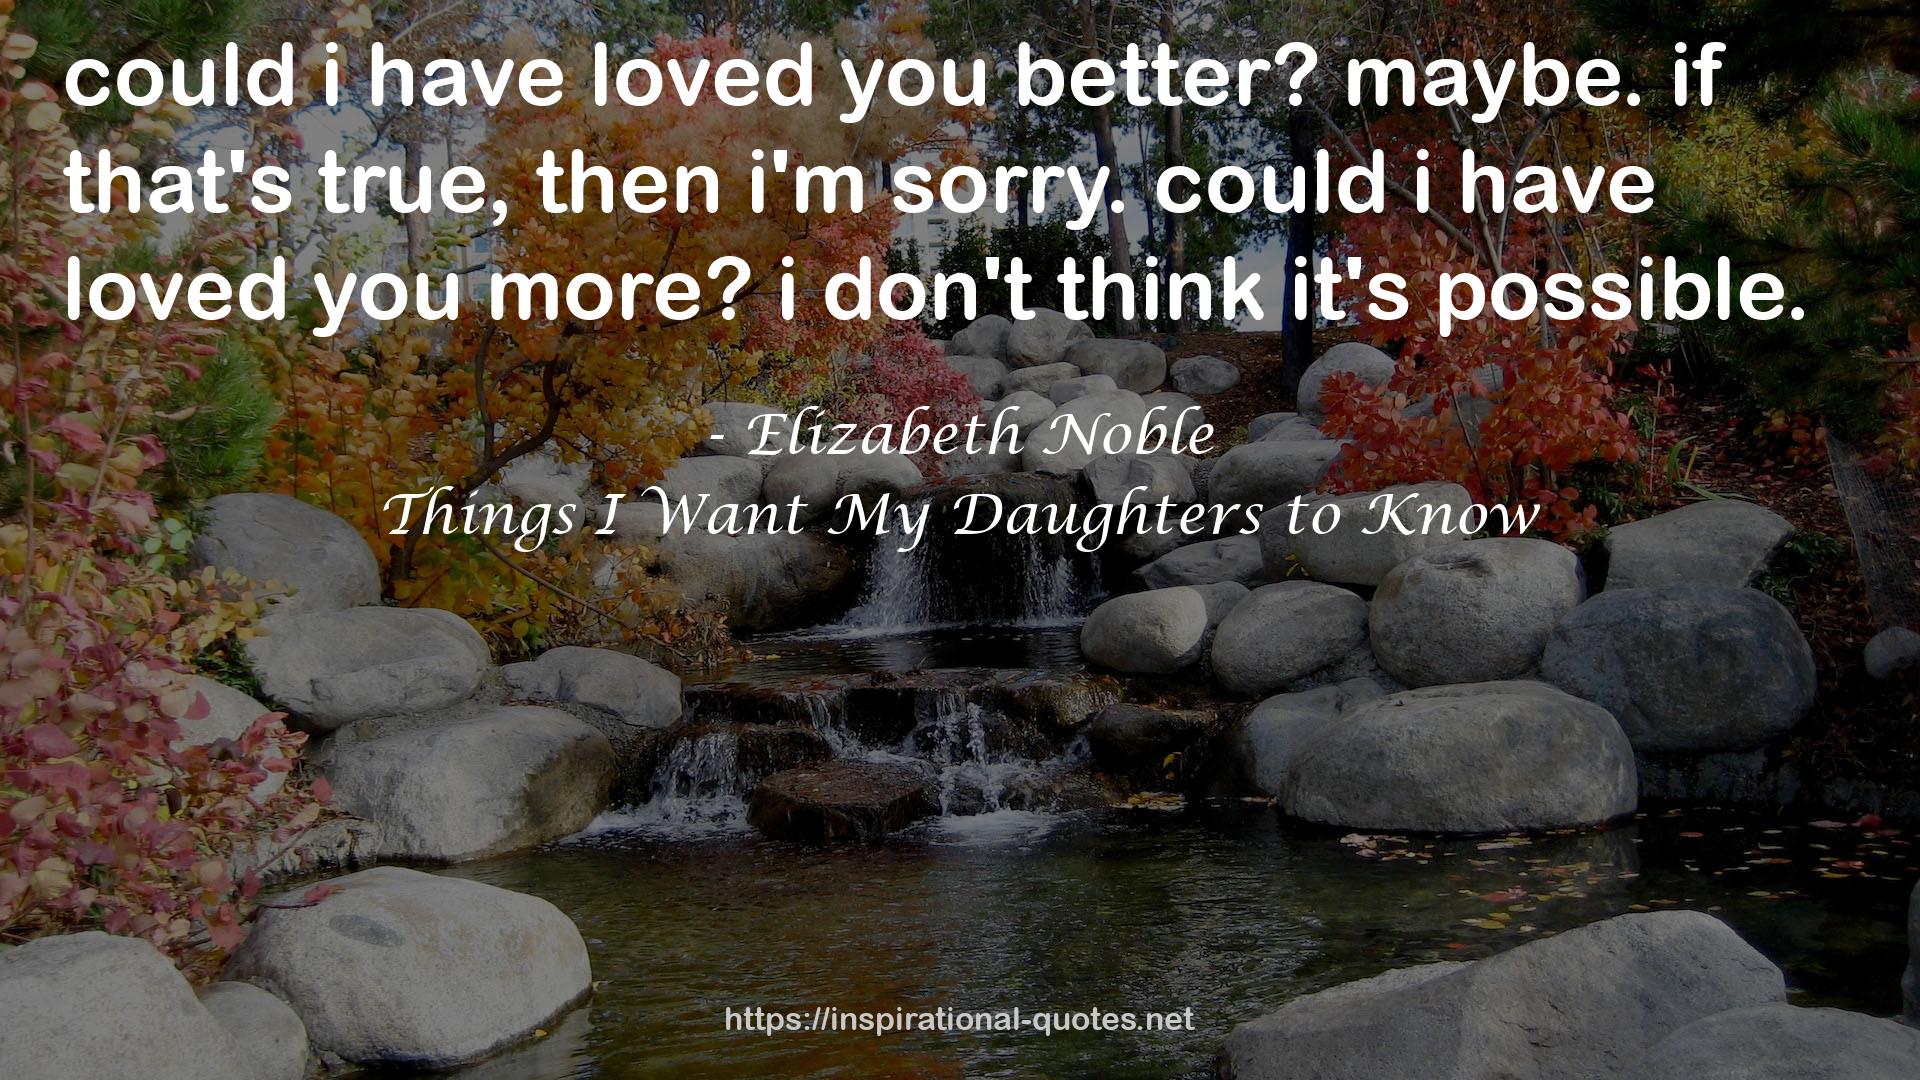 Things I Want My Daughters to Know QUOTES